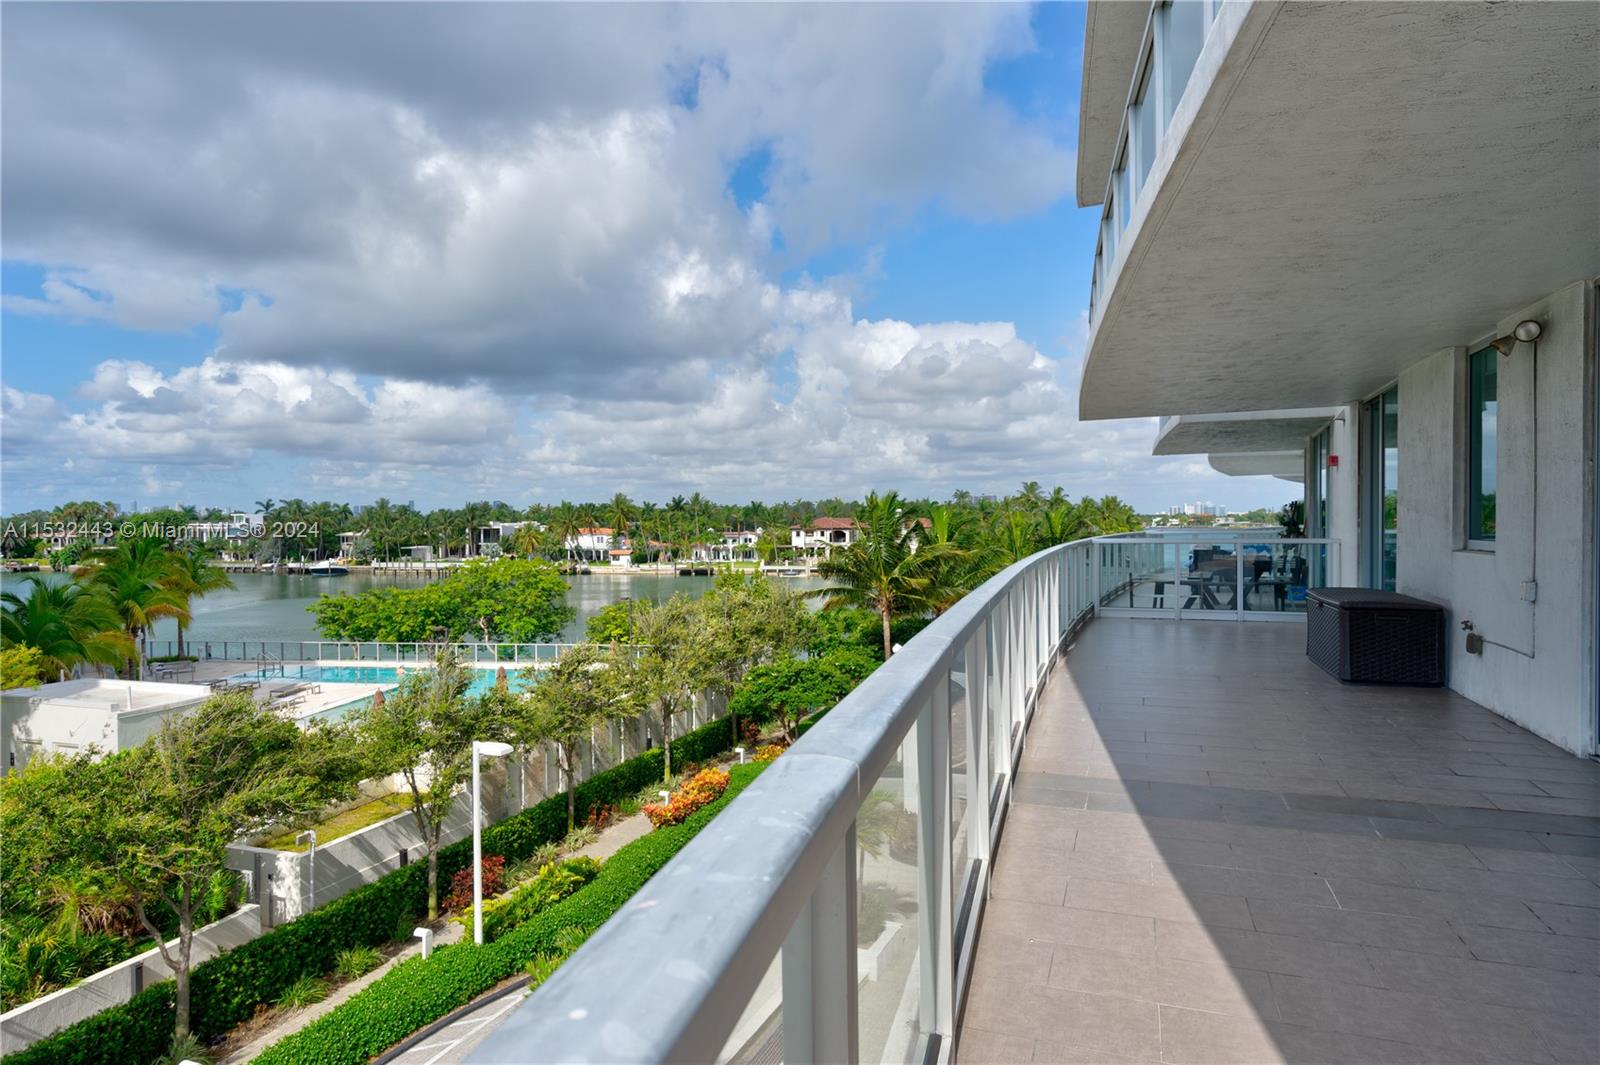 Beautiful 3 Bed/2.5 Bath at luxurious and boutique building Eden House in Miami Beach! Bright and Spacious with Open Water Views. Huge private patio area. Elegant Lobby, State-of-the-Art fitness center with Bay View, Resort Pool, Spa & Garden, On-site Concierge, 24h valet /security. Amazing location, with a short walk to the beach, shops and restaurants.